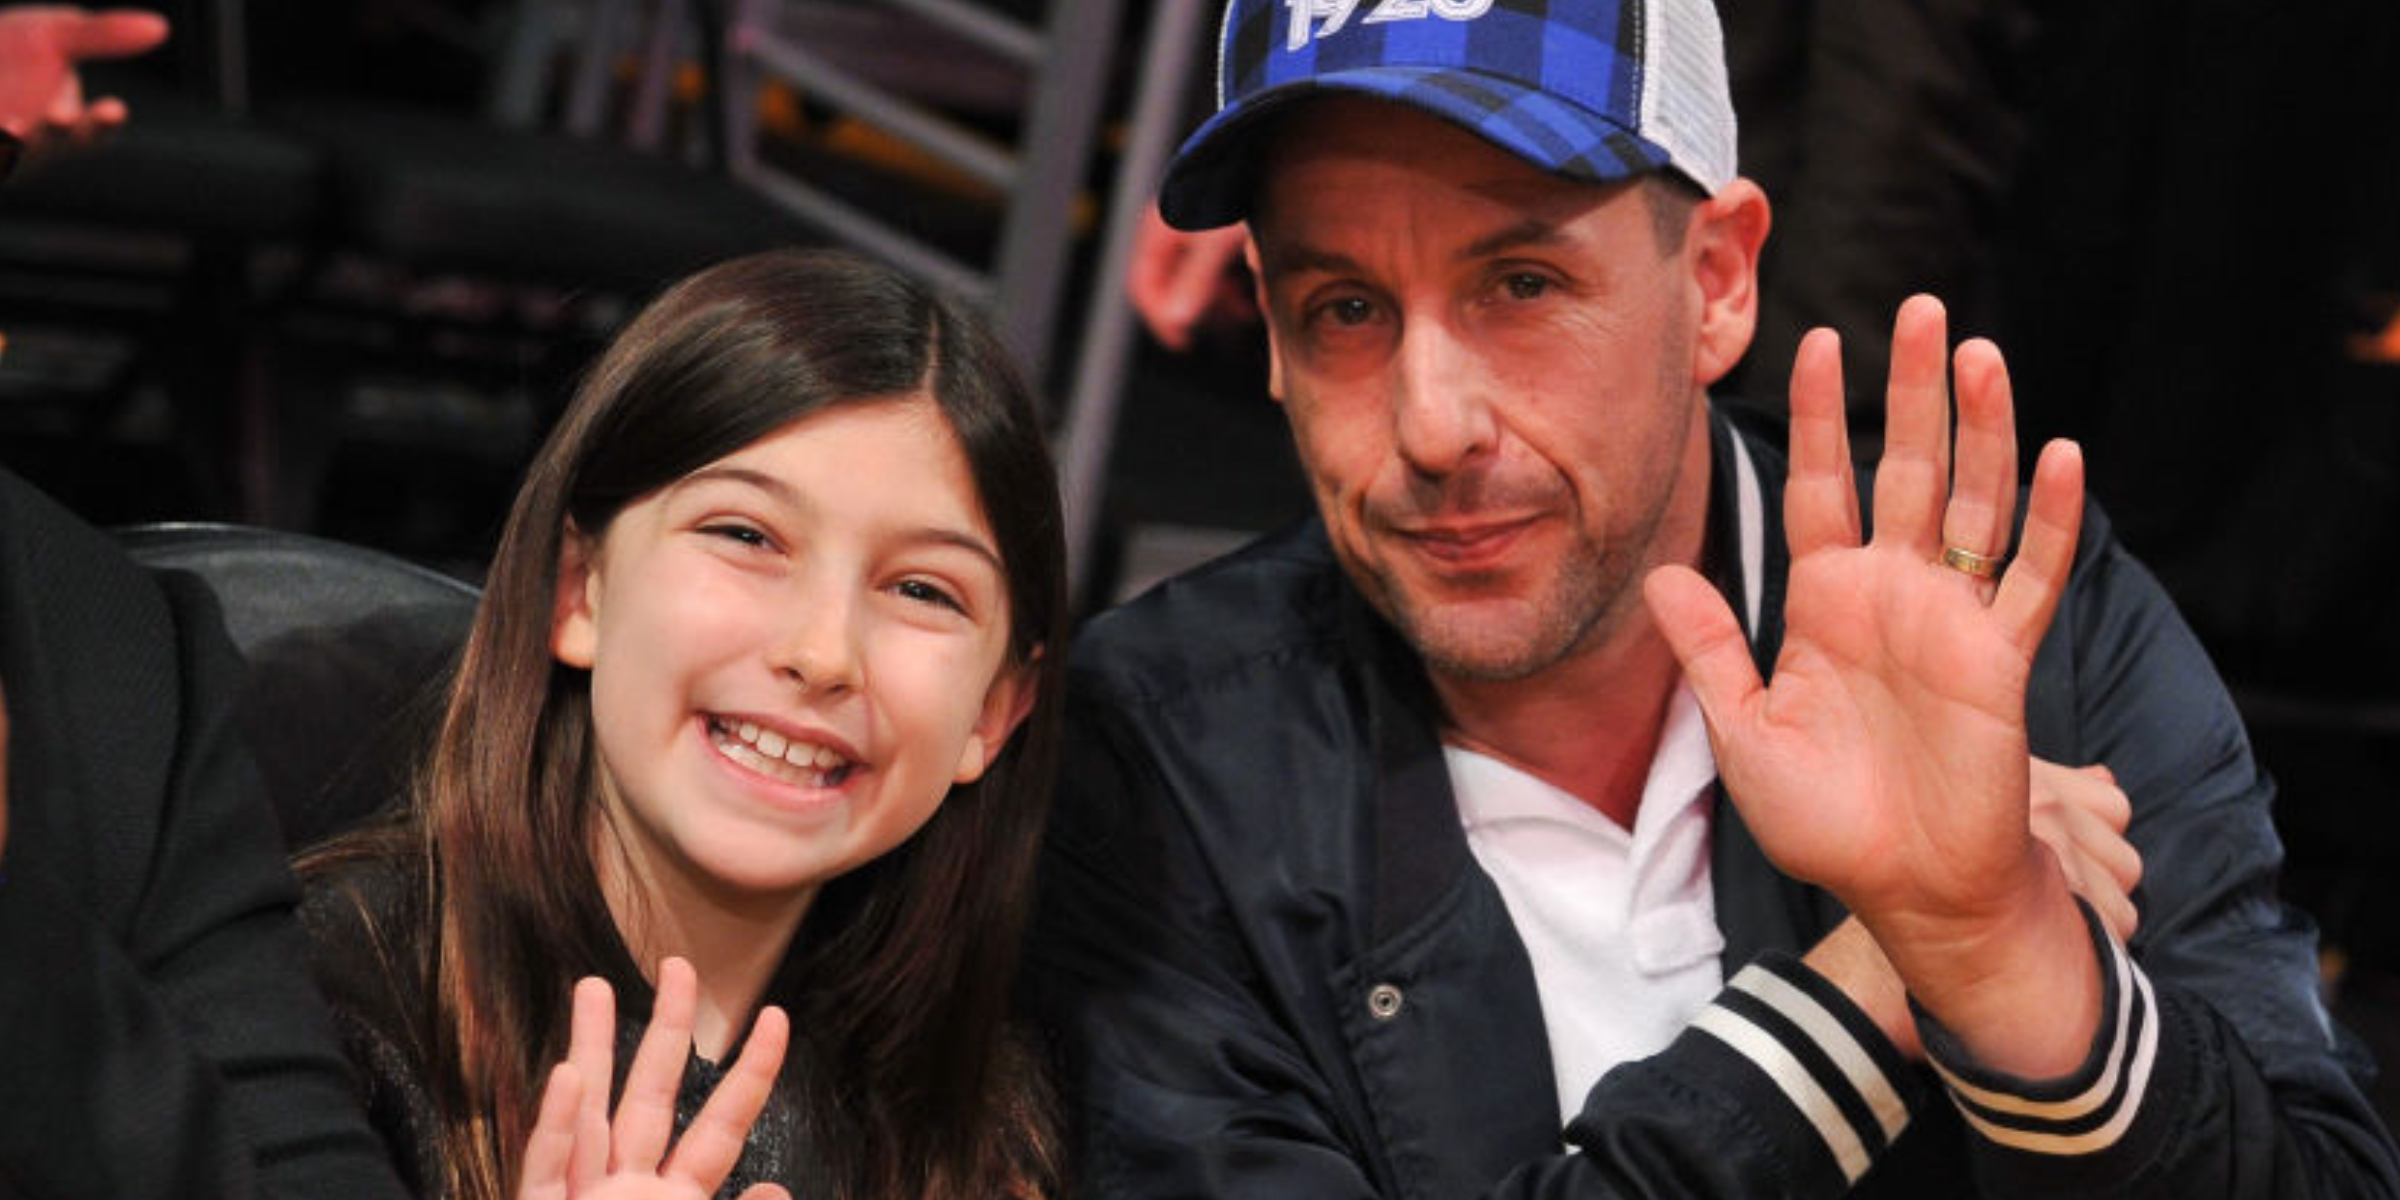 Sunny and Adam Sandler | Source: Getty Images